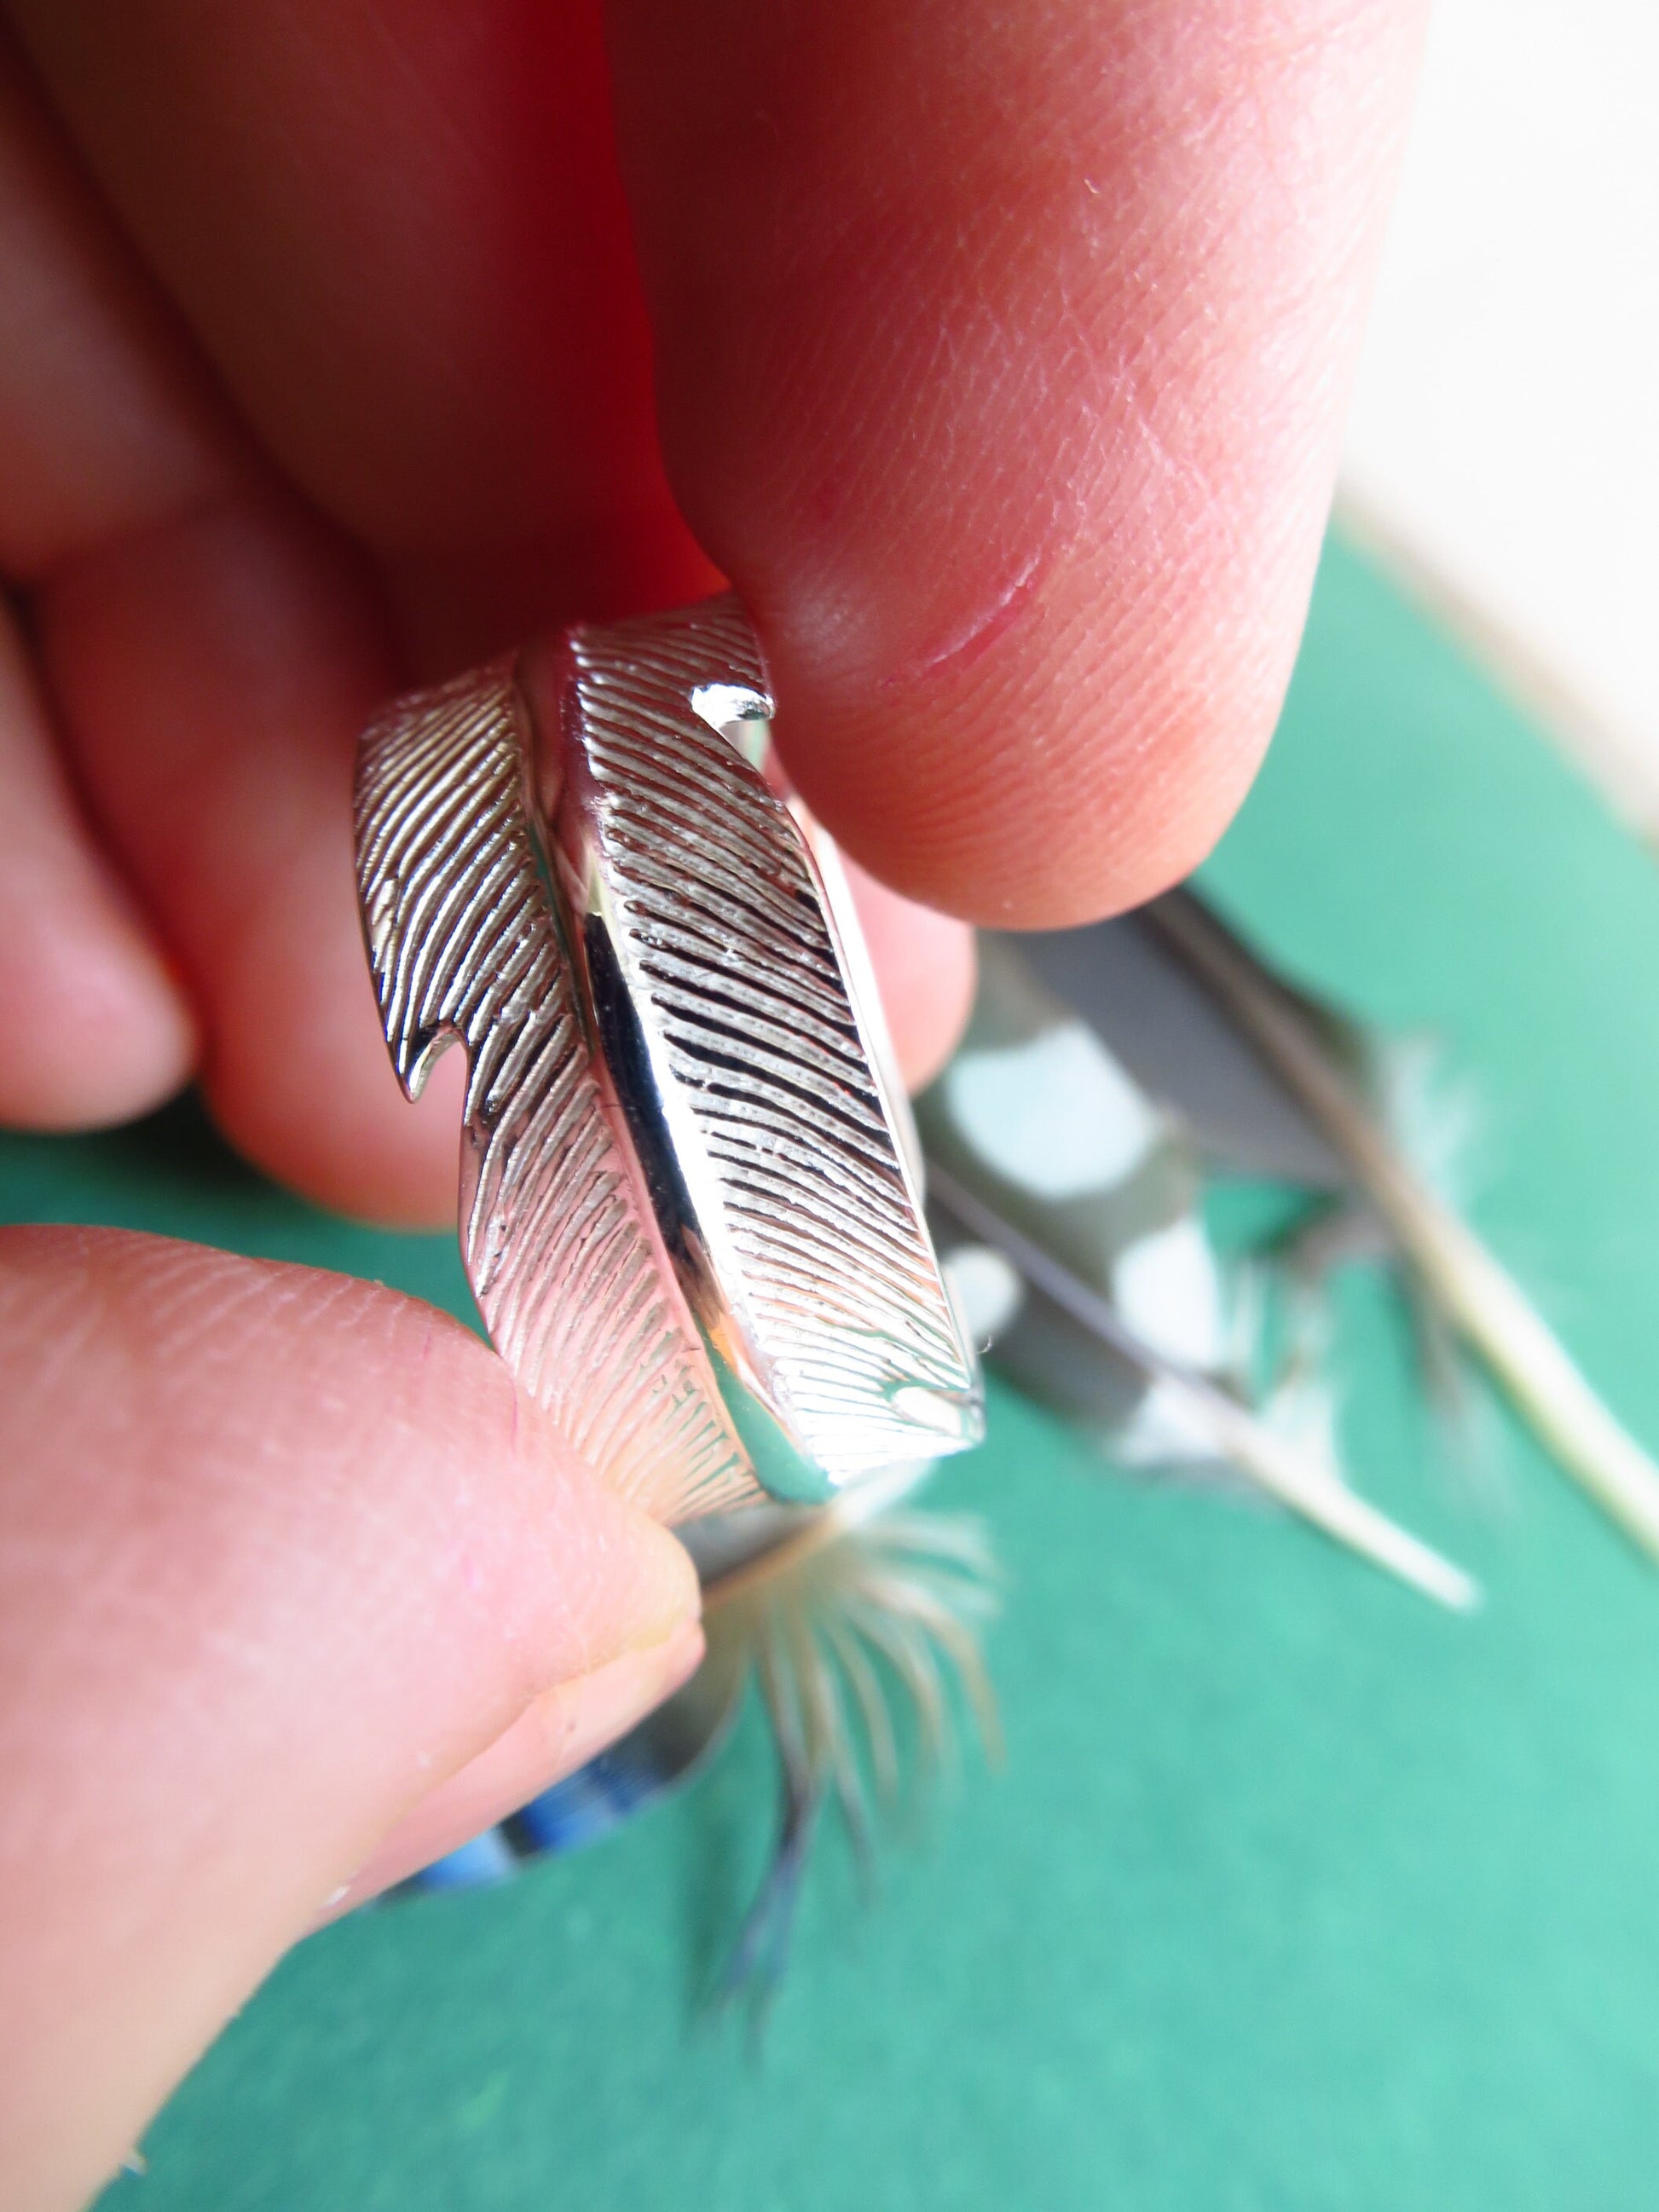 Casual feather individual Size 7,5 made of massive sterling Silver Cocktail ring Statement ring bird feather ring friendship